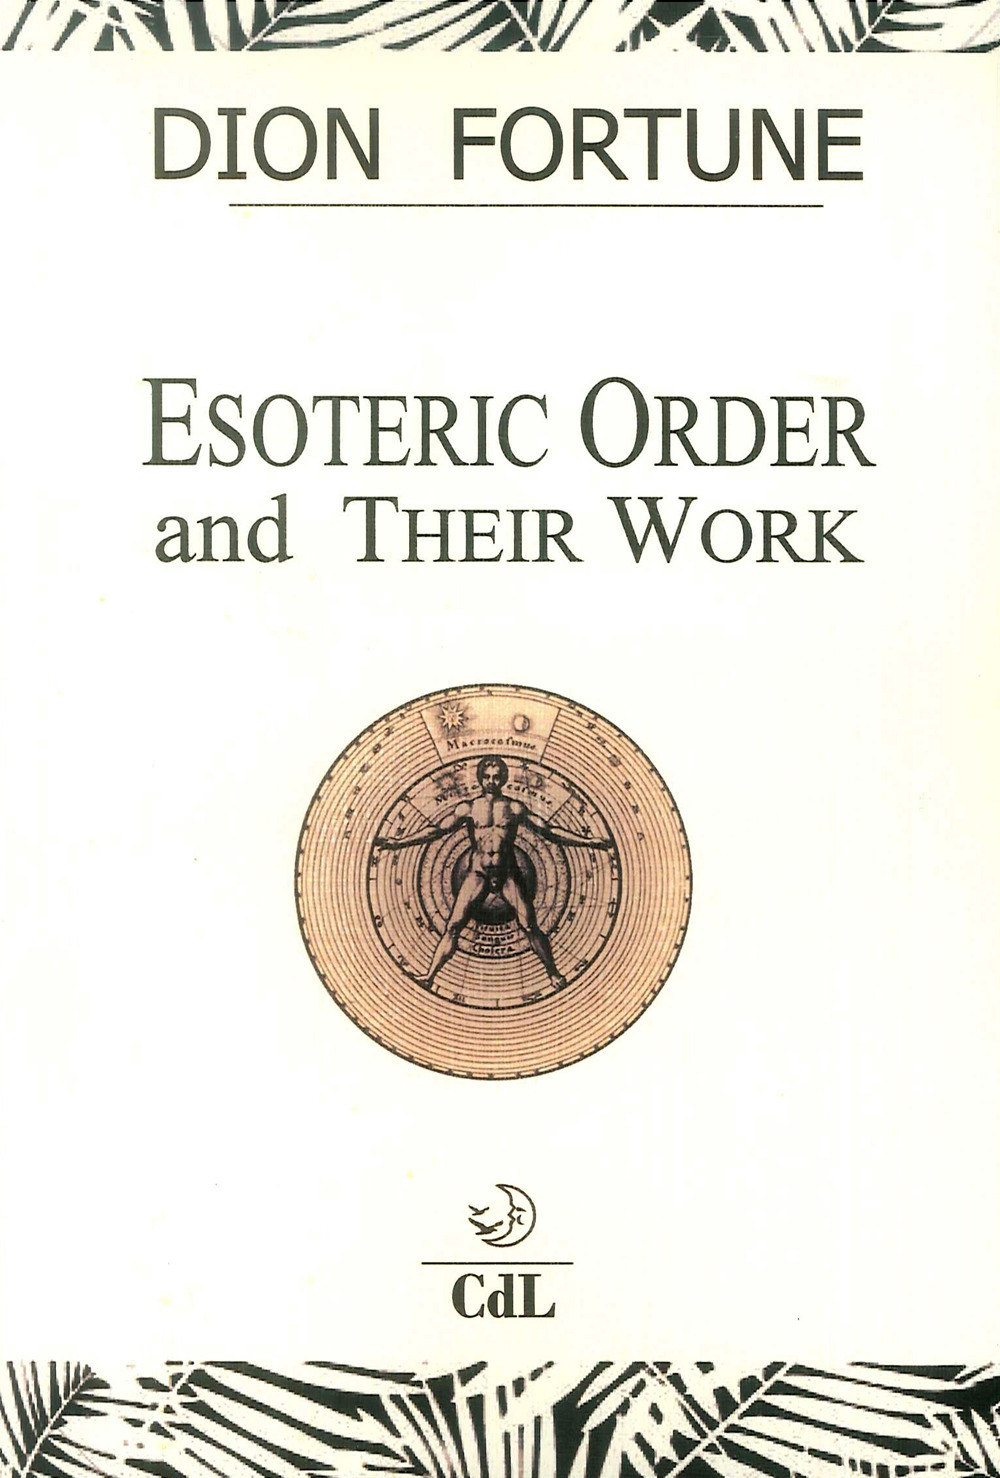 Esoteric orders and their work